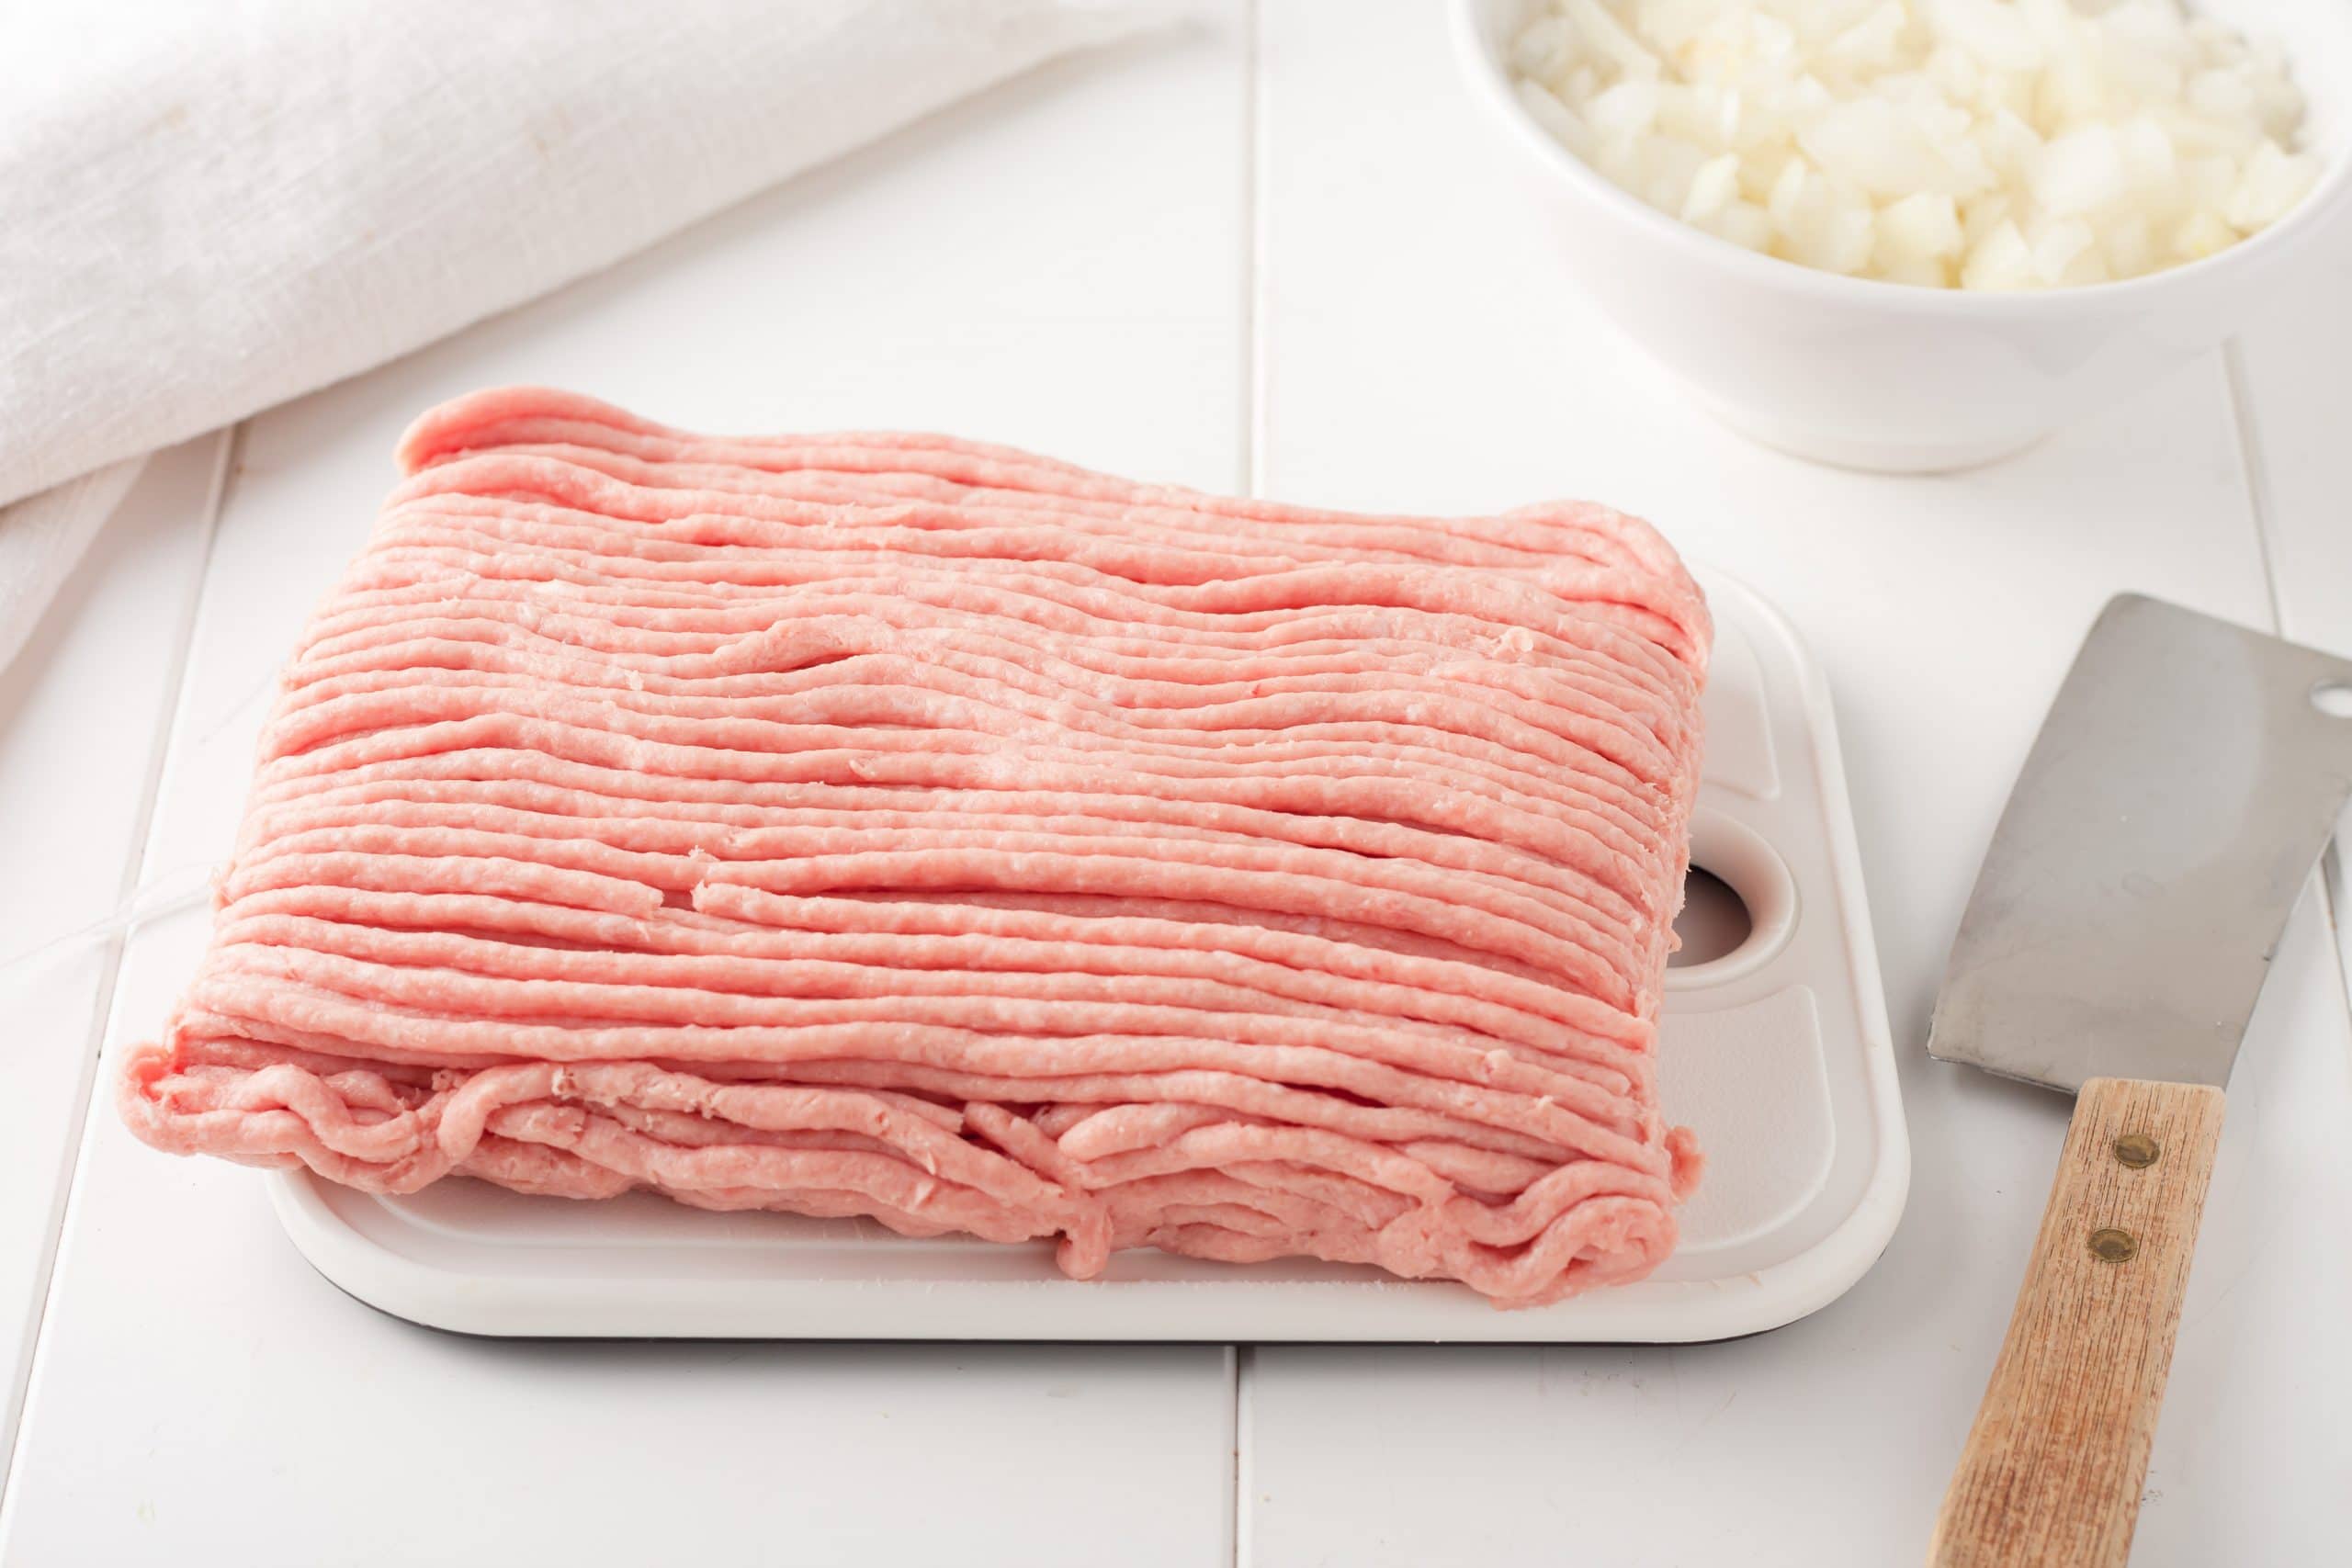 164,000 Pounds of Ground Turkey is Being Recalled